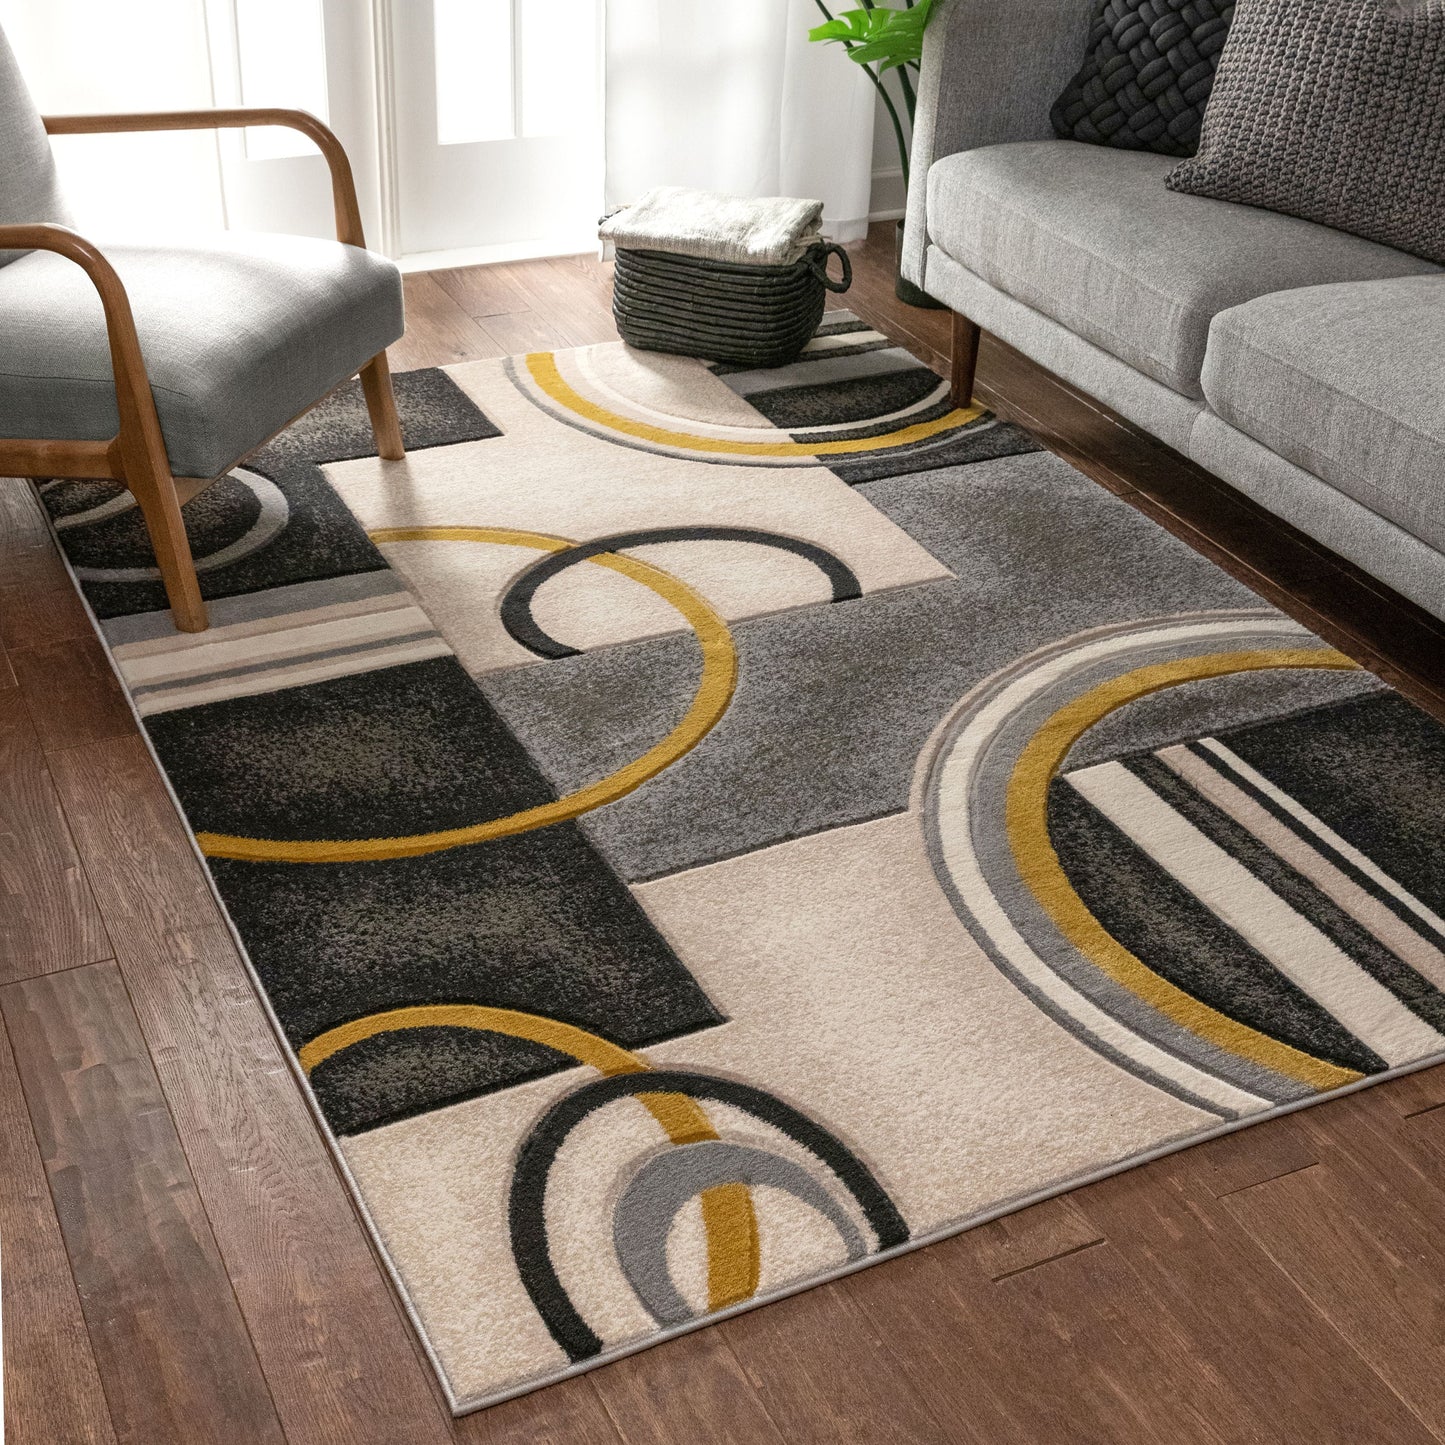 Belle Gold Modern Abstract Geometric 3D Textured Rug GV-21